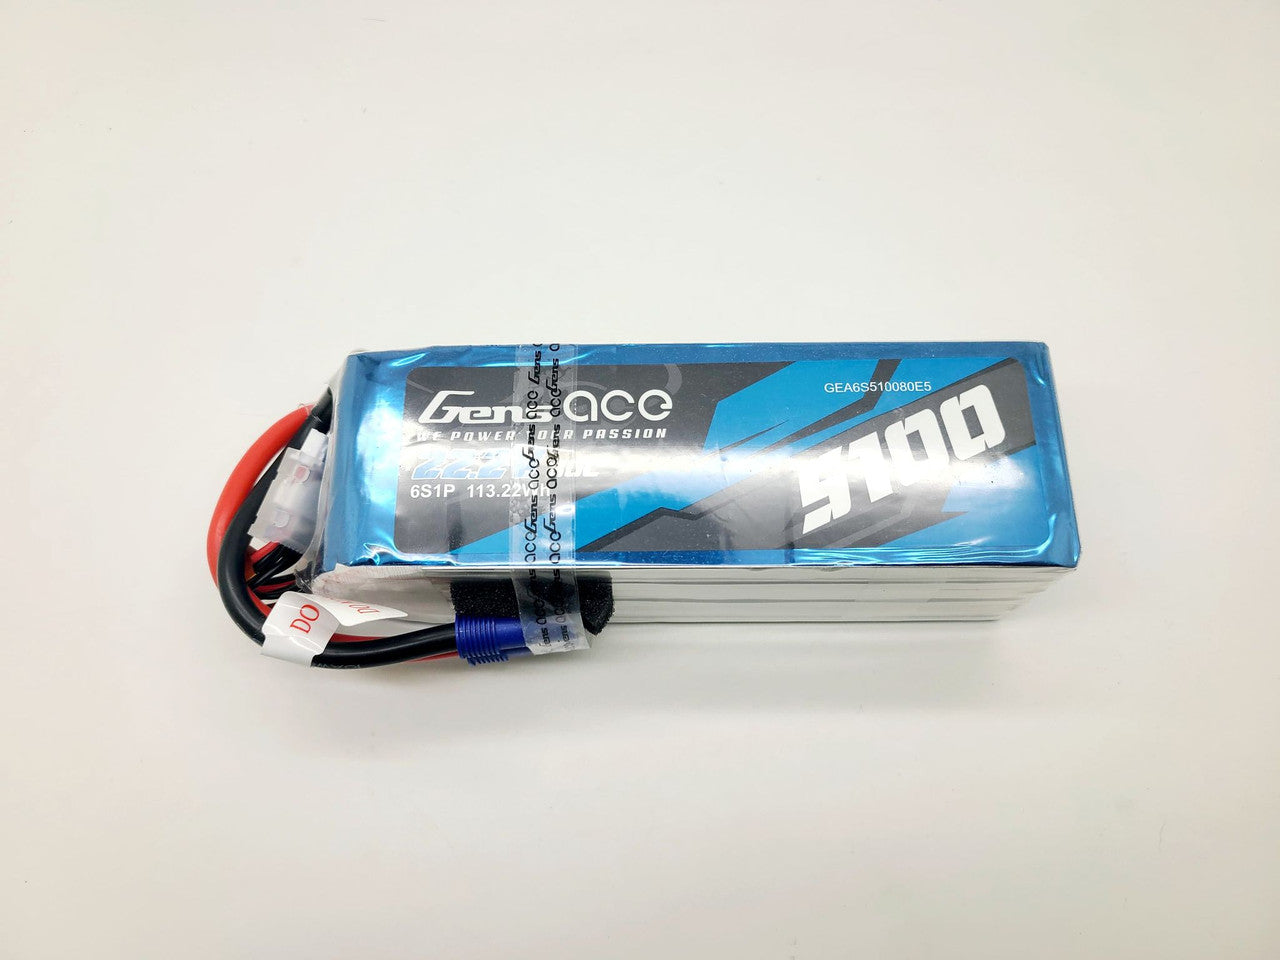 Gens Ace 5100 mAh 80C 22.2V  6S Lipo Battery Pack with EC5